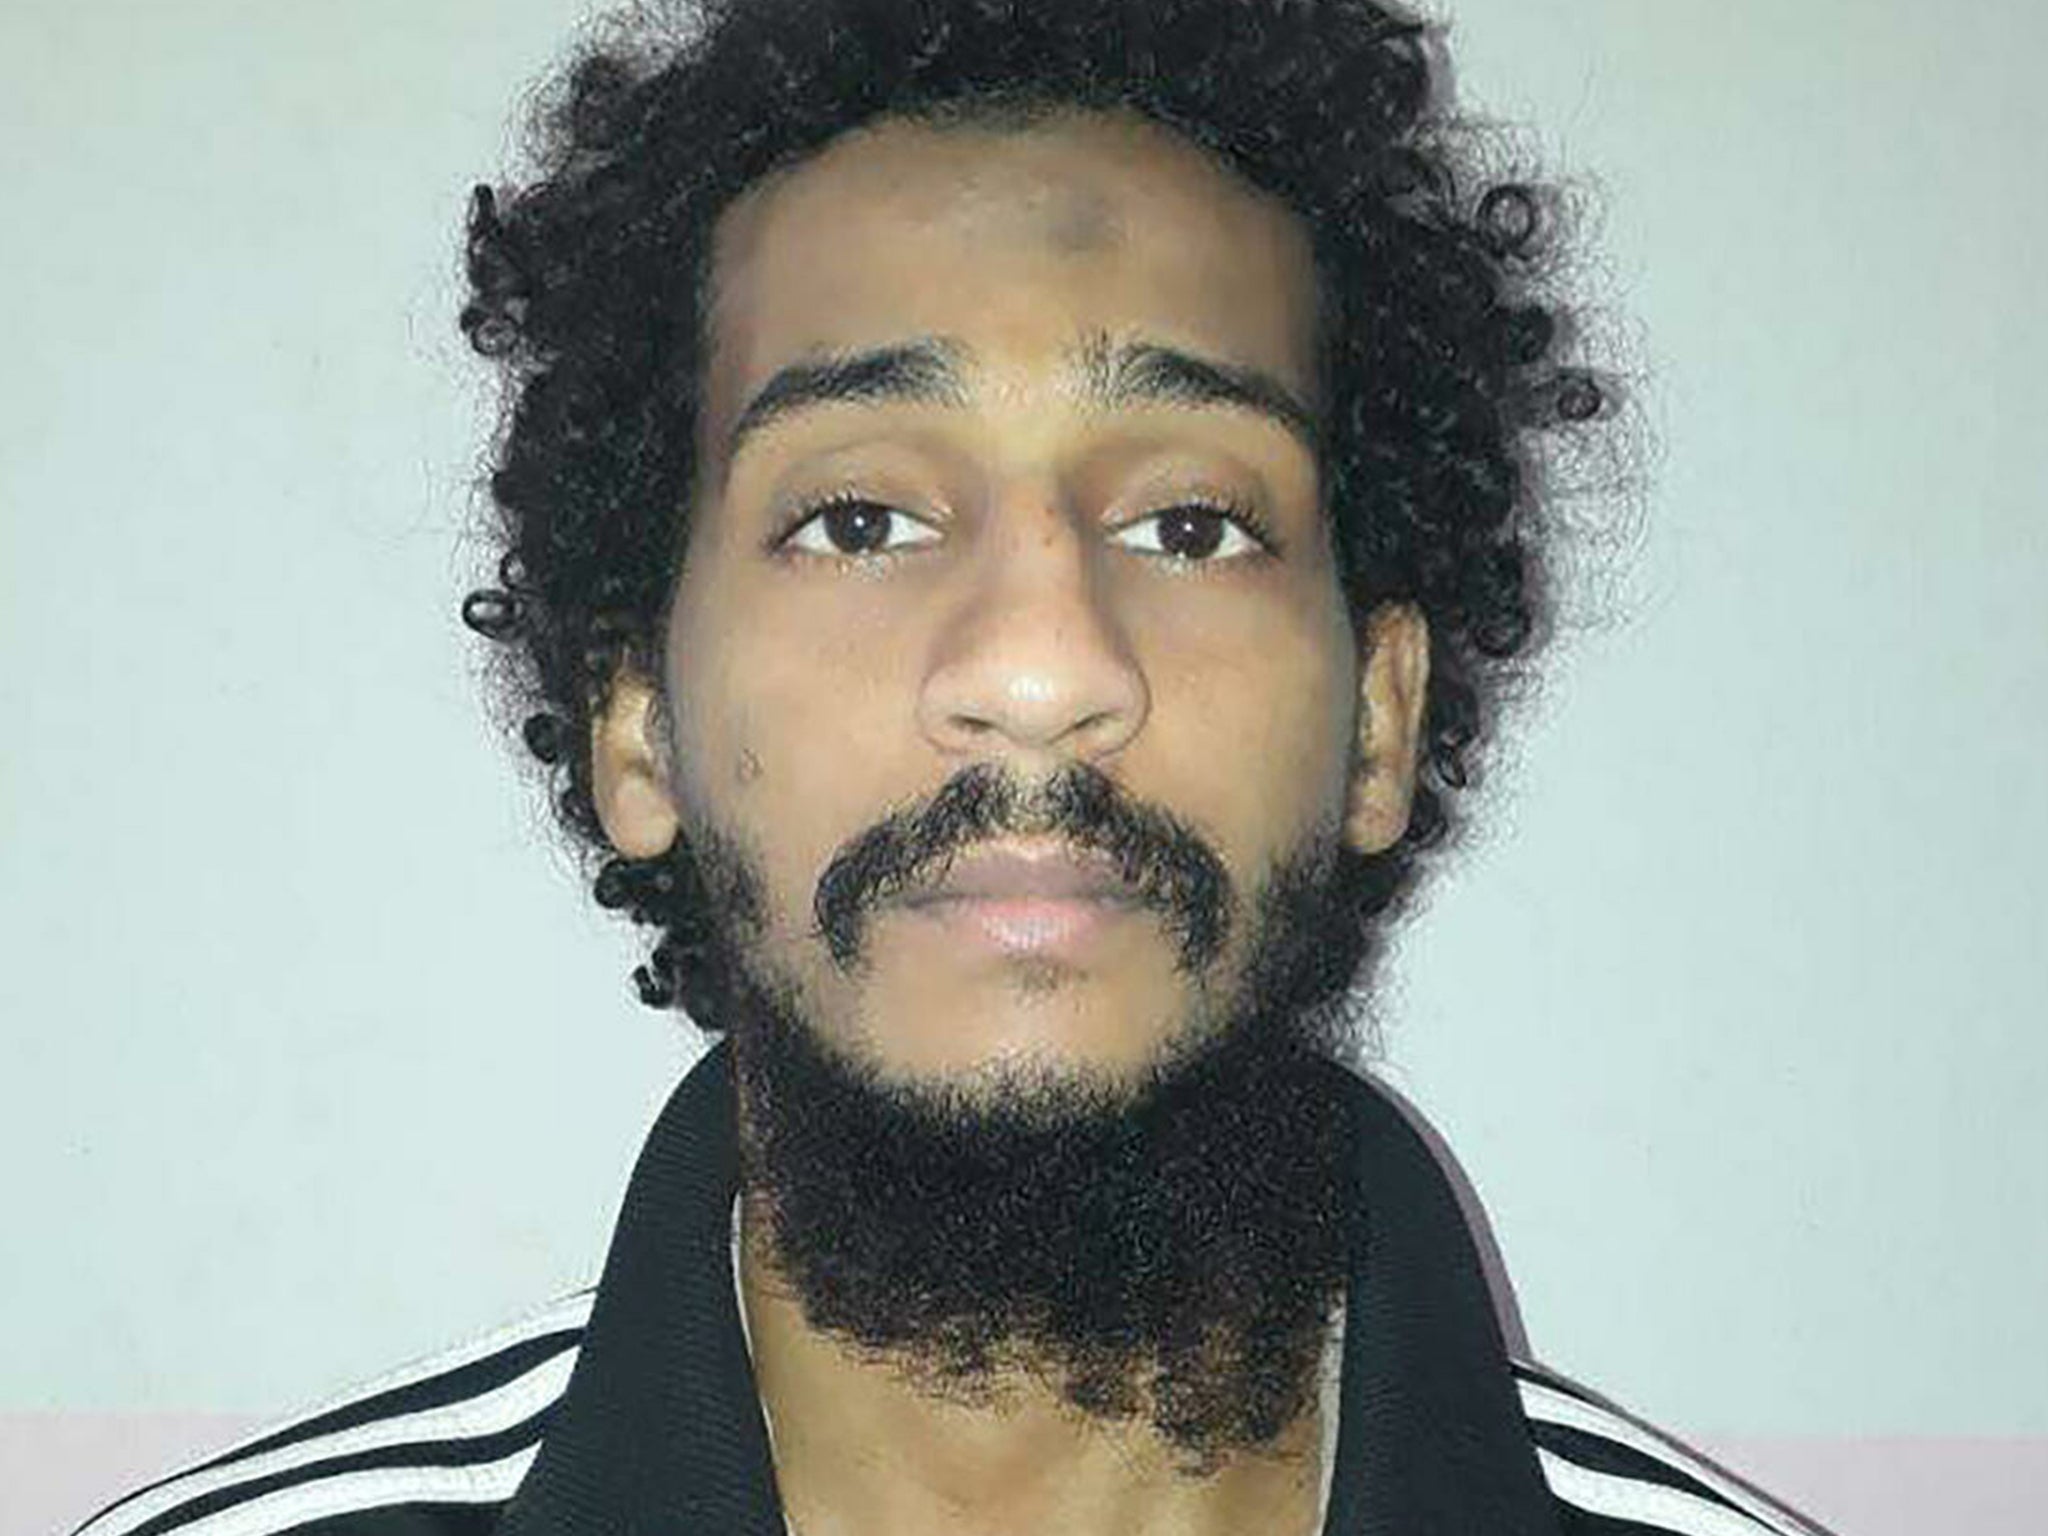 El Shafee Elsheikh is on trial after being captured in 2018